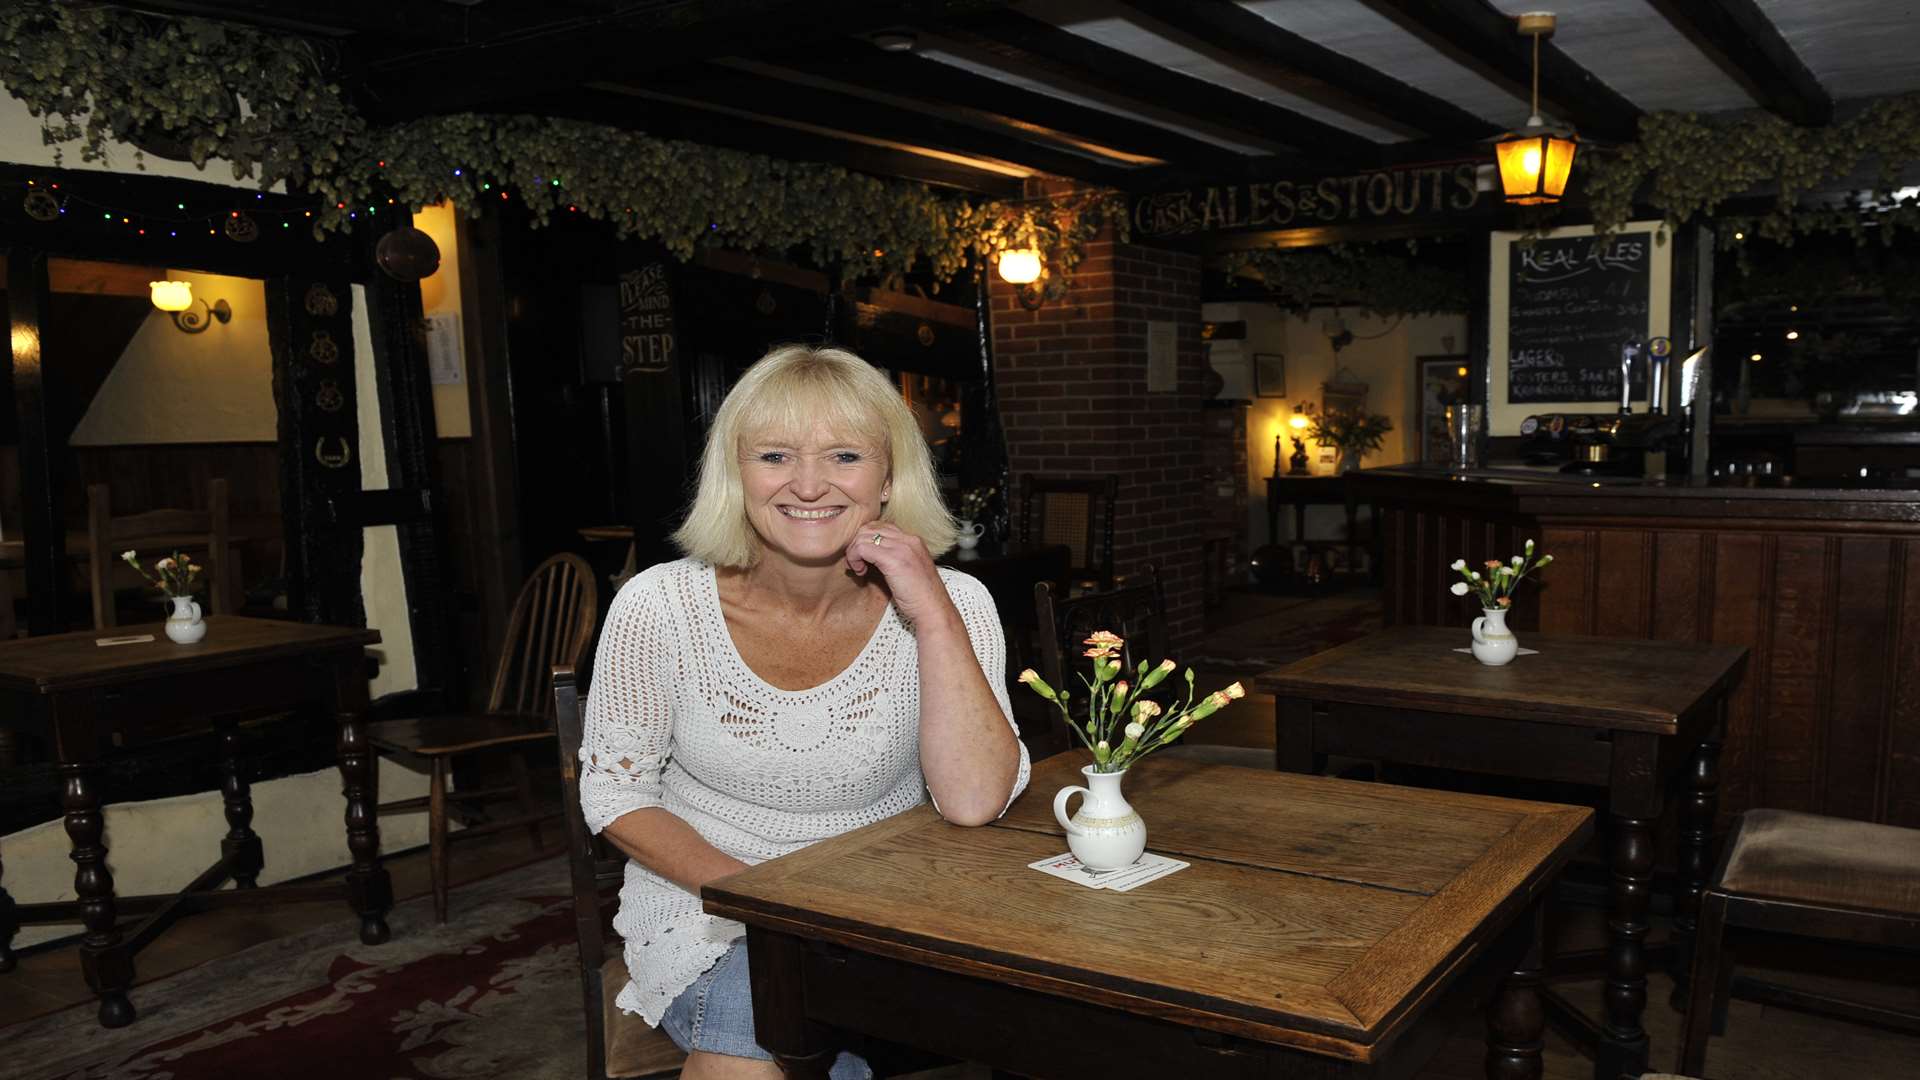 Running the Anchor Inn is Michelle's first experience of working in a pub